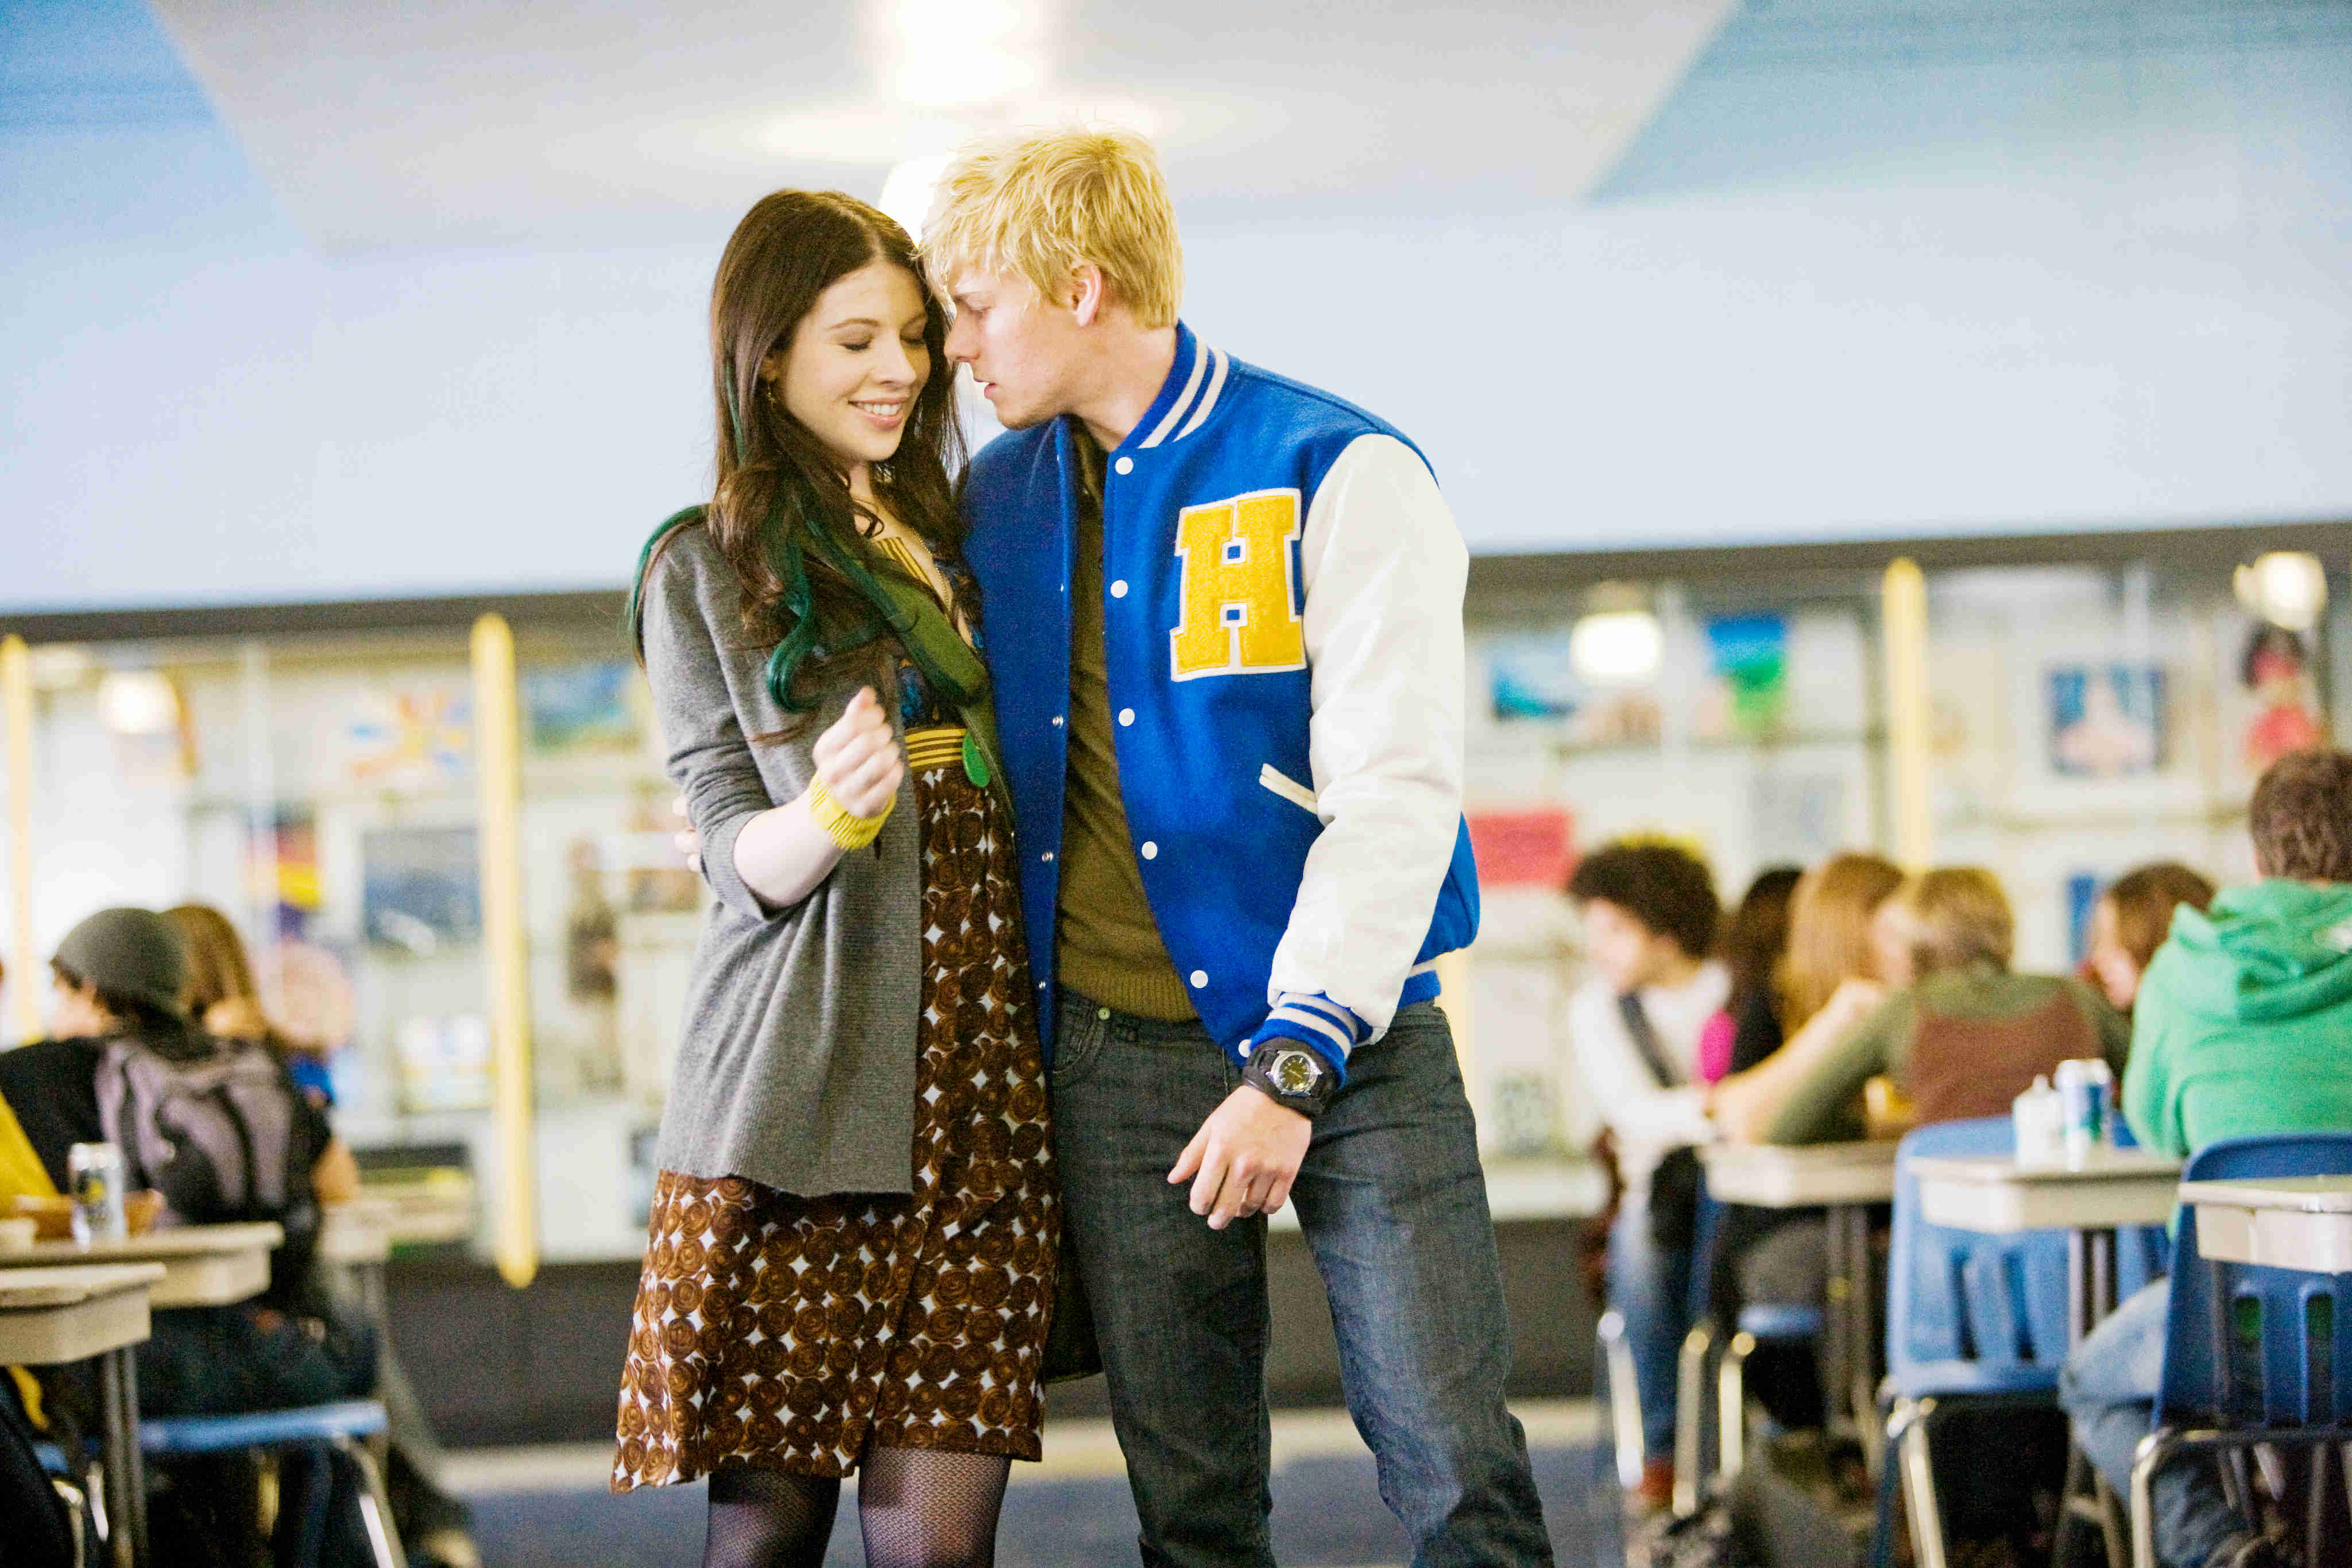 Michelle Trachtenberg stars as Maggie O'Donnell and Hunter Parrish stars as Stan in New Line Cinema's 17 Again (2009)